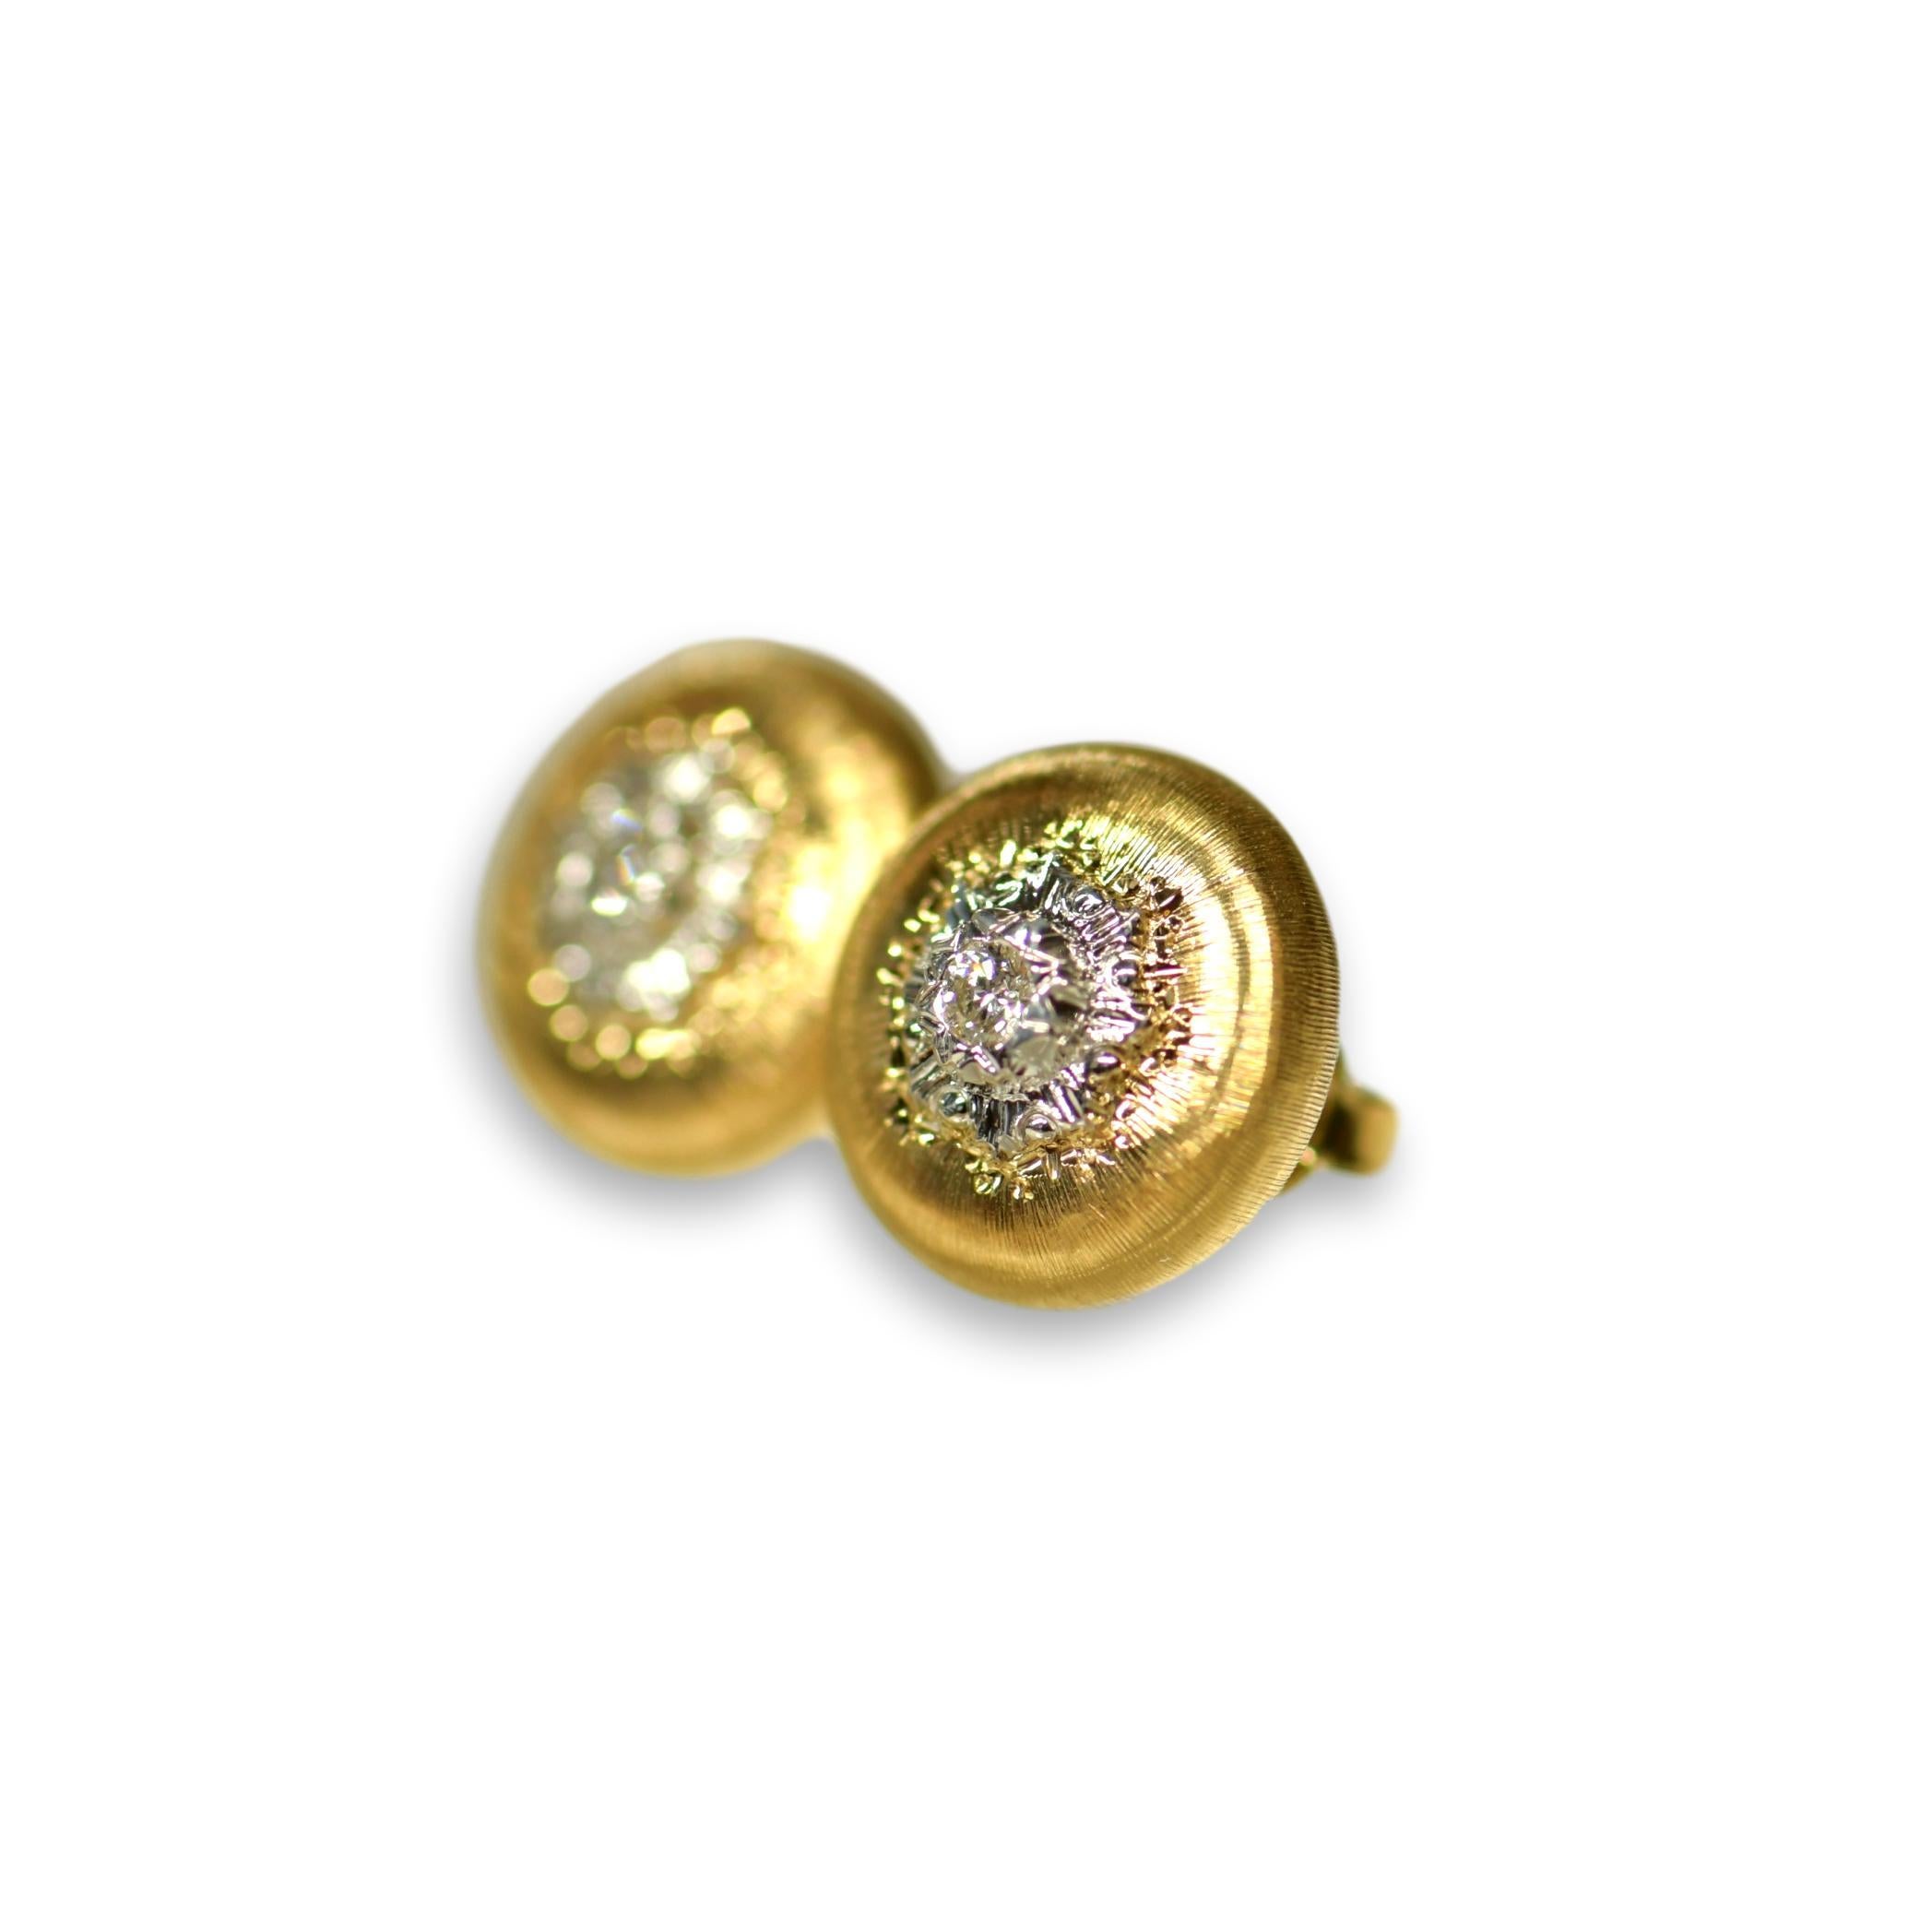 Weight: 5g
Diamond: 0.6ct total
Diameter Approx 12 mm
_________________________________________
Metal 18K Yellow Gold
Condition Excellent
Comes with Dandelion Antiques Presentation Box _________________________________________
A pair of 18ct gold